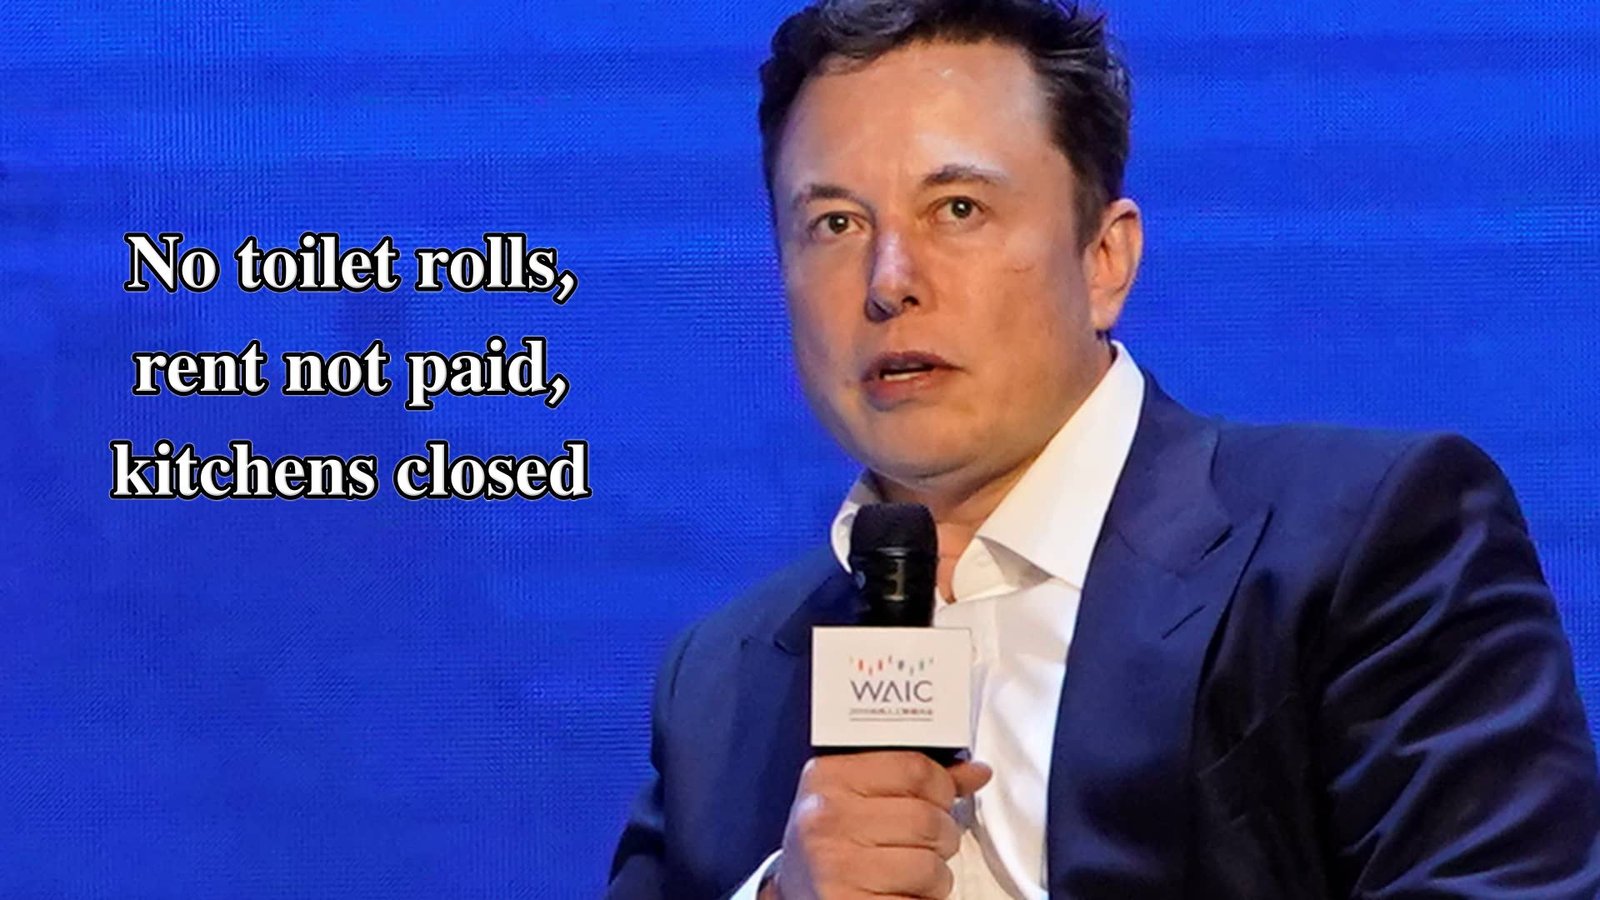 No toilet rolls, rent not paid, kitchens closed: Elon Musk's Twitter is going through a rough phase